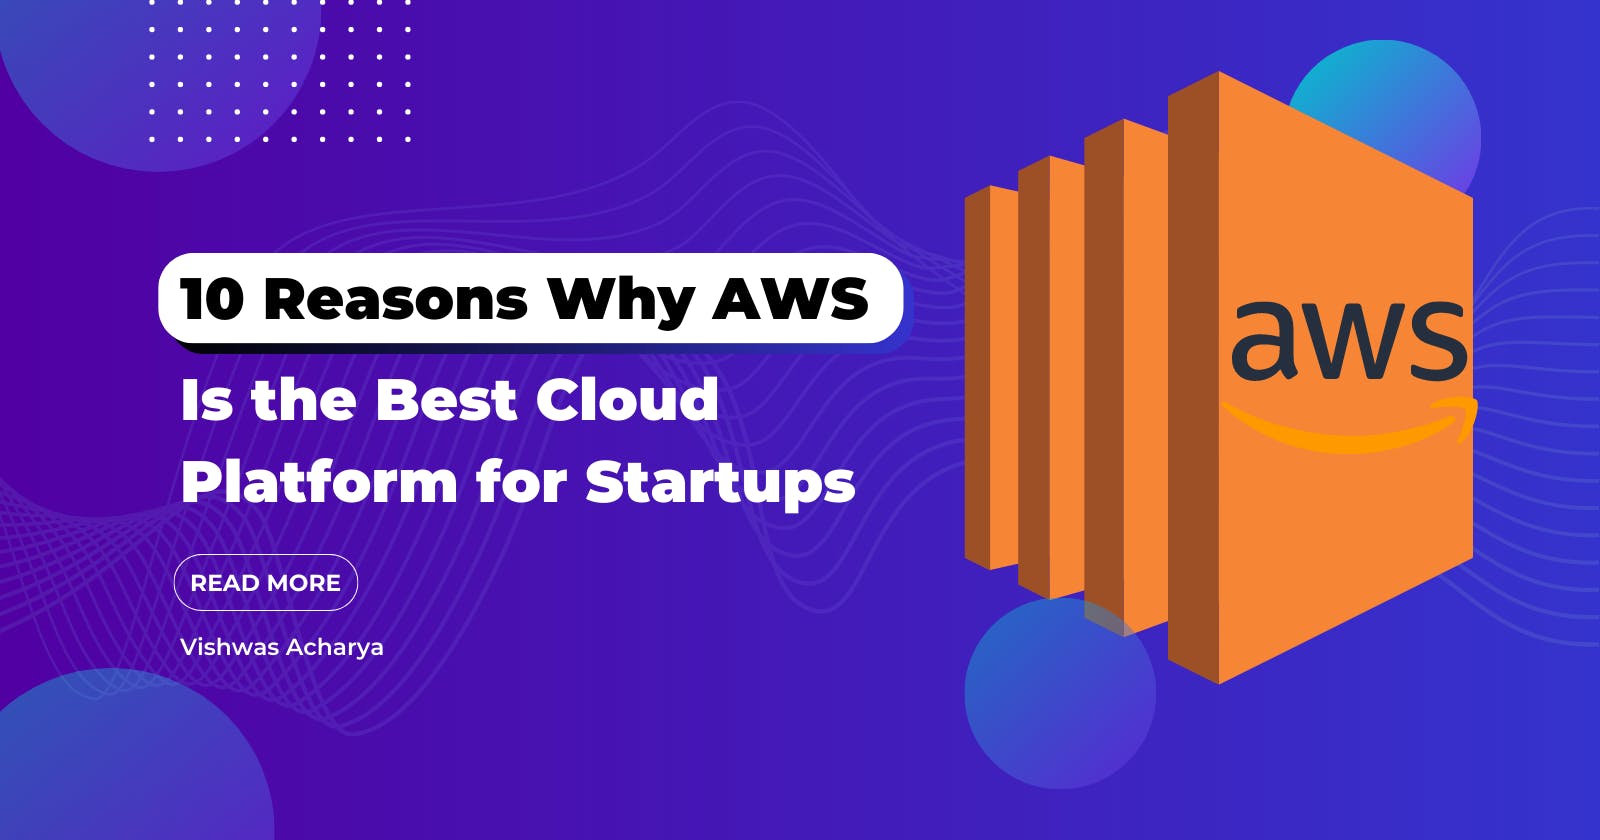 10 Reasons Why AWS Is the Best Cloud Platform for Startups